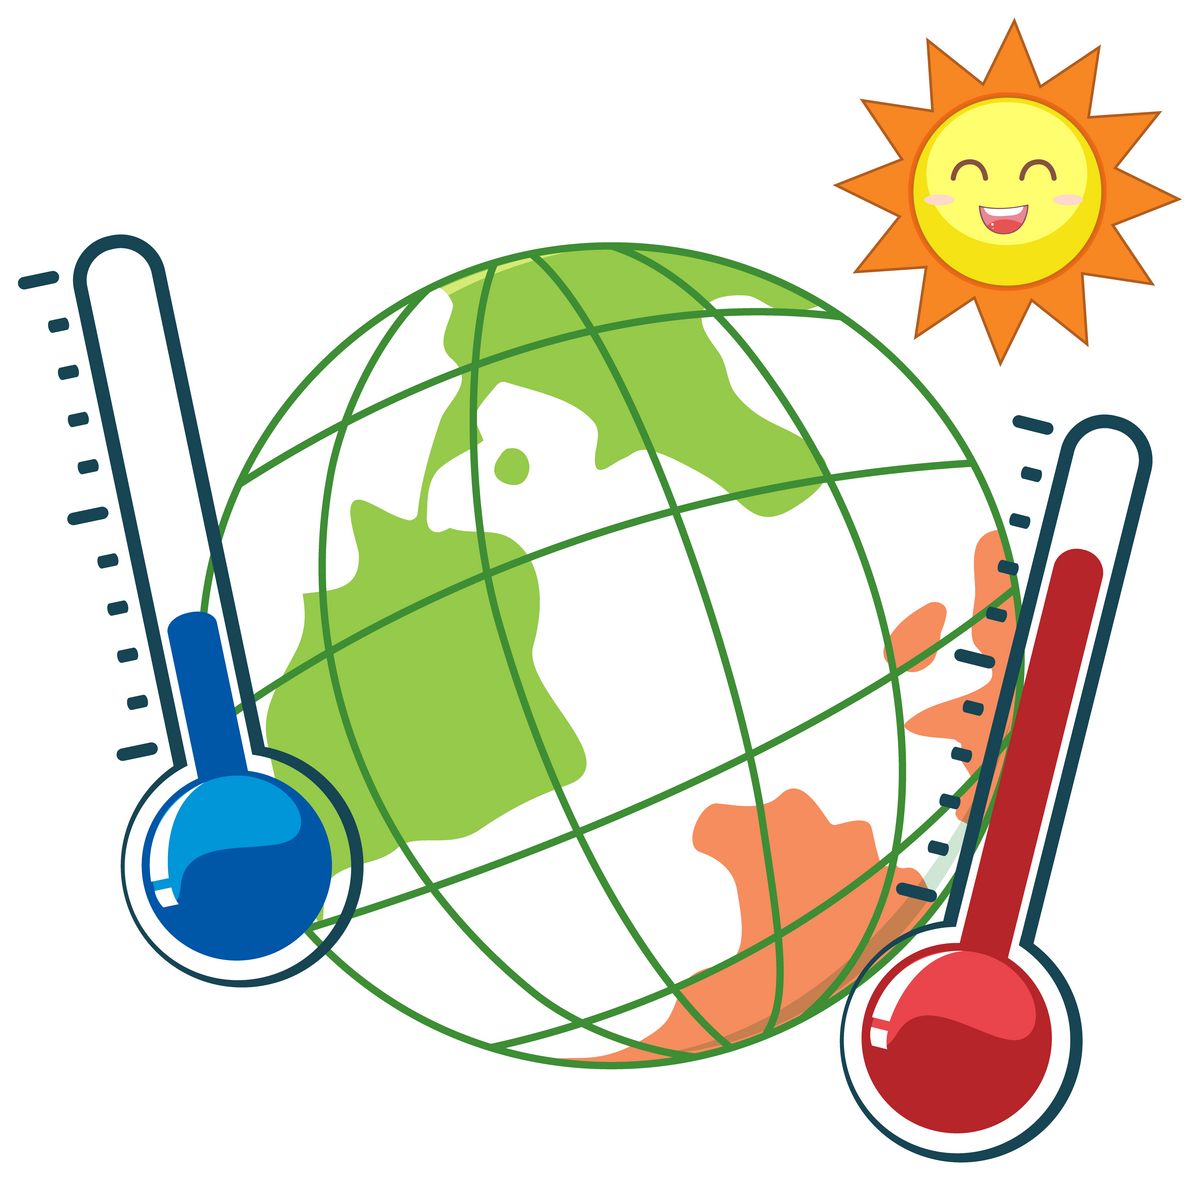 <a href="https://www.freepik.com/free-vector/sunny-weather-earth-planet-icon_38517966.htm#fromView=search&page=1&position=3&uuid=7bba4e7c-30dc-4430-bb28-6ea668ed5b67">Image by brgfx on Freepik</a>